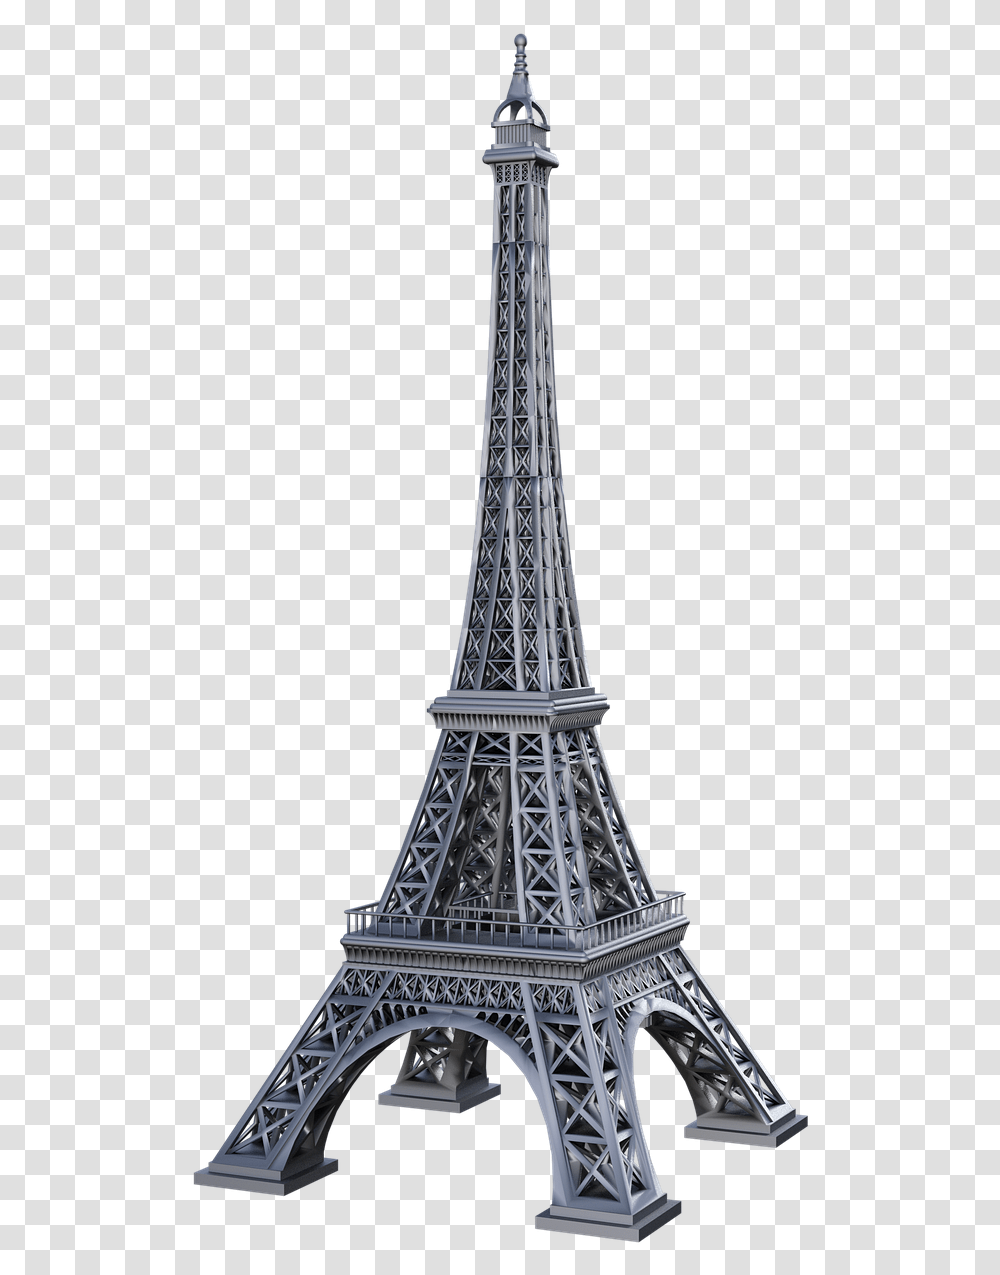 Tower, Architecture, Building, Spire, Steeple Transparent Png